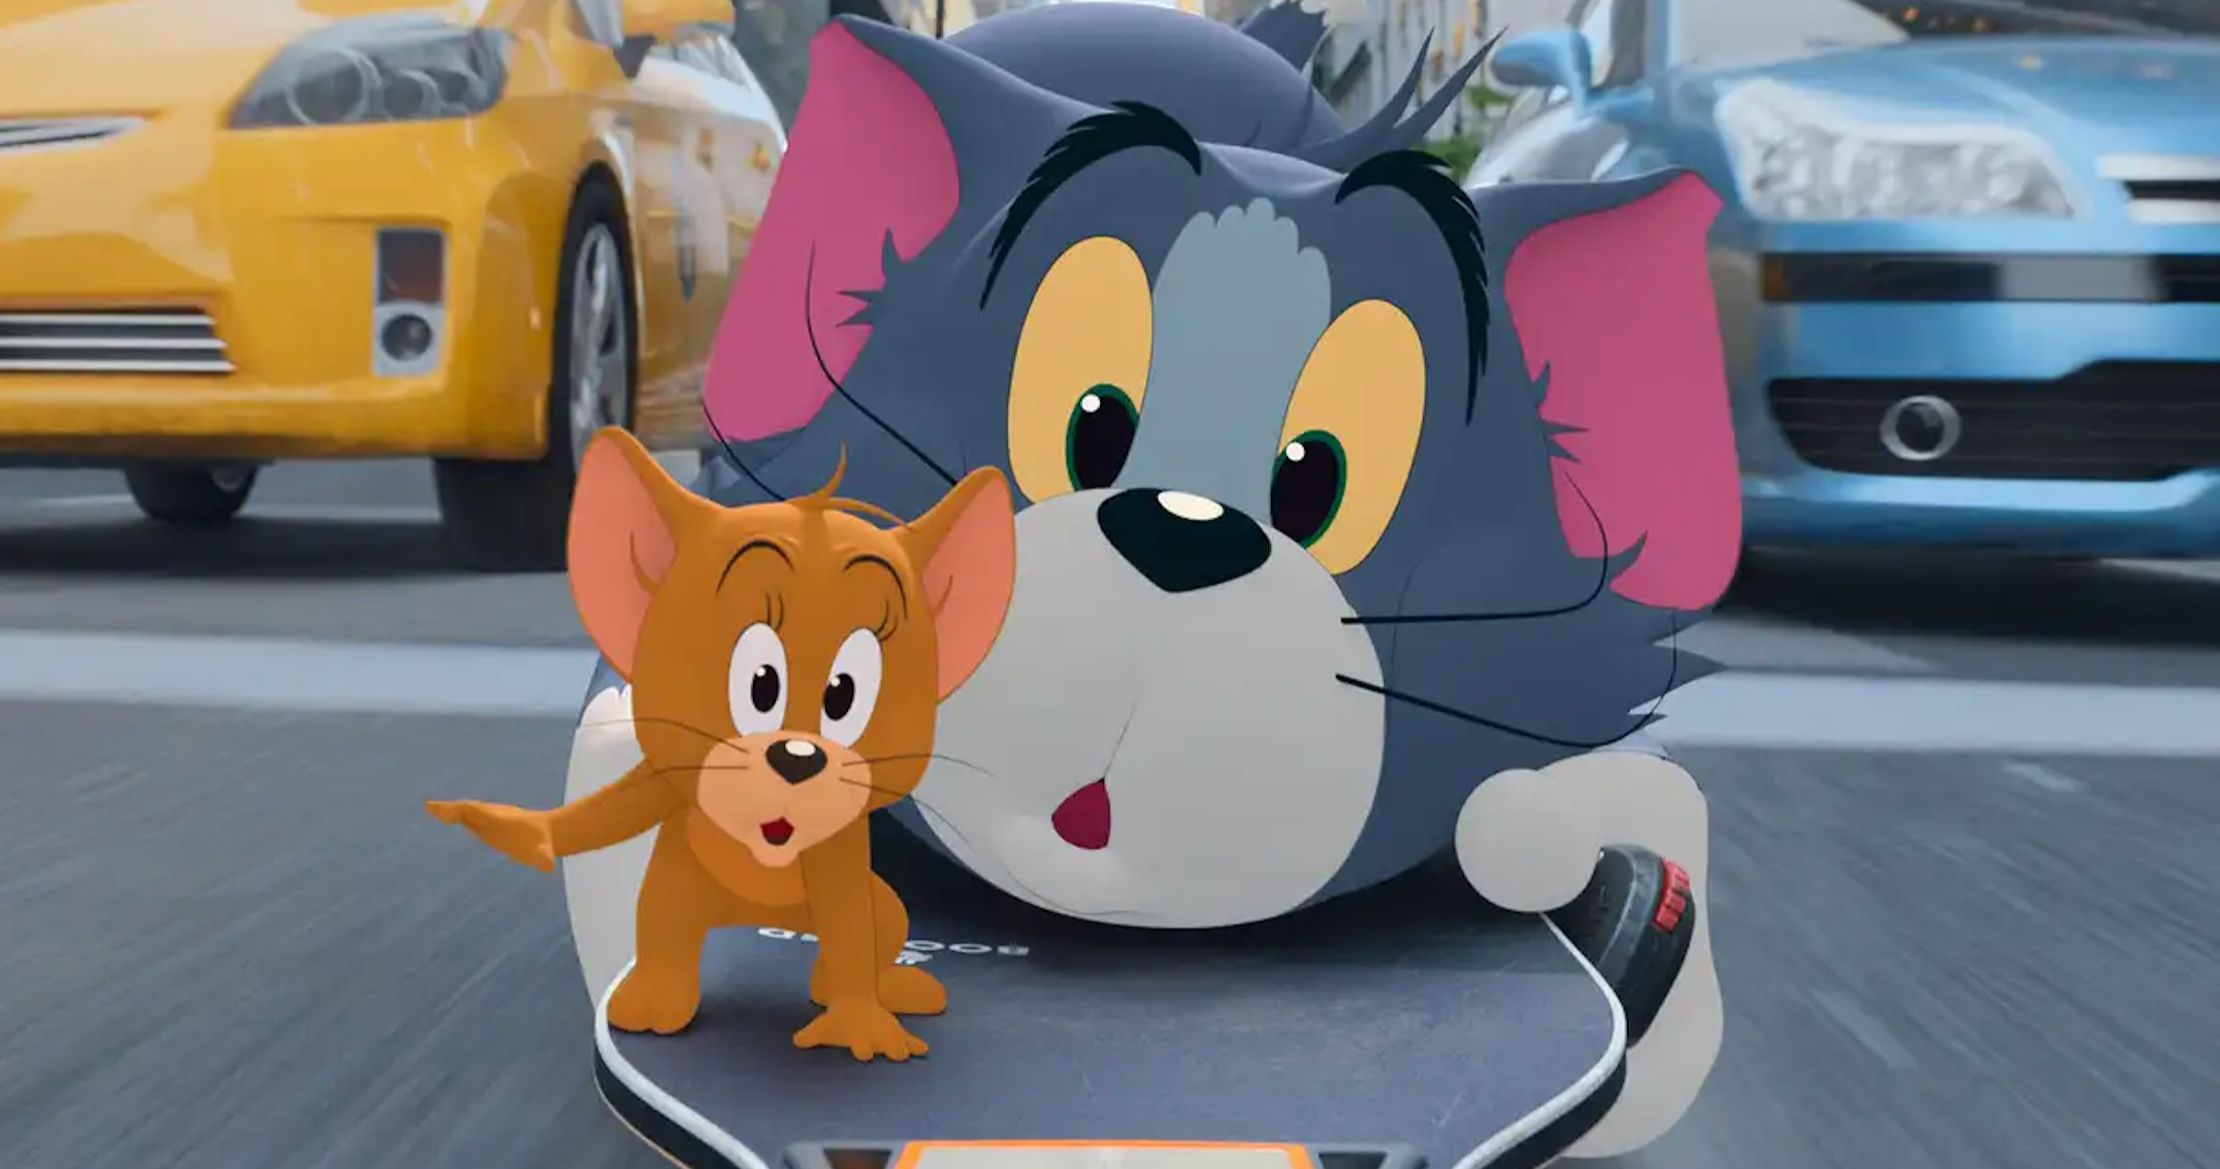 Tom and Jerry in New York Sequel Series Is Coming to HBO Max This July